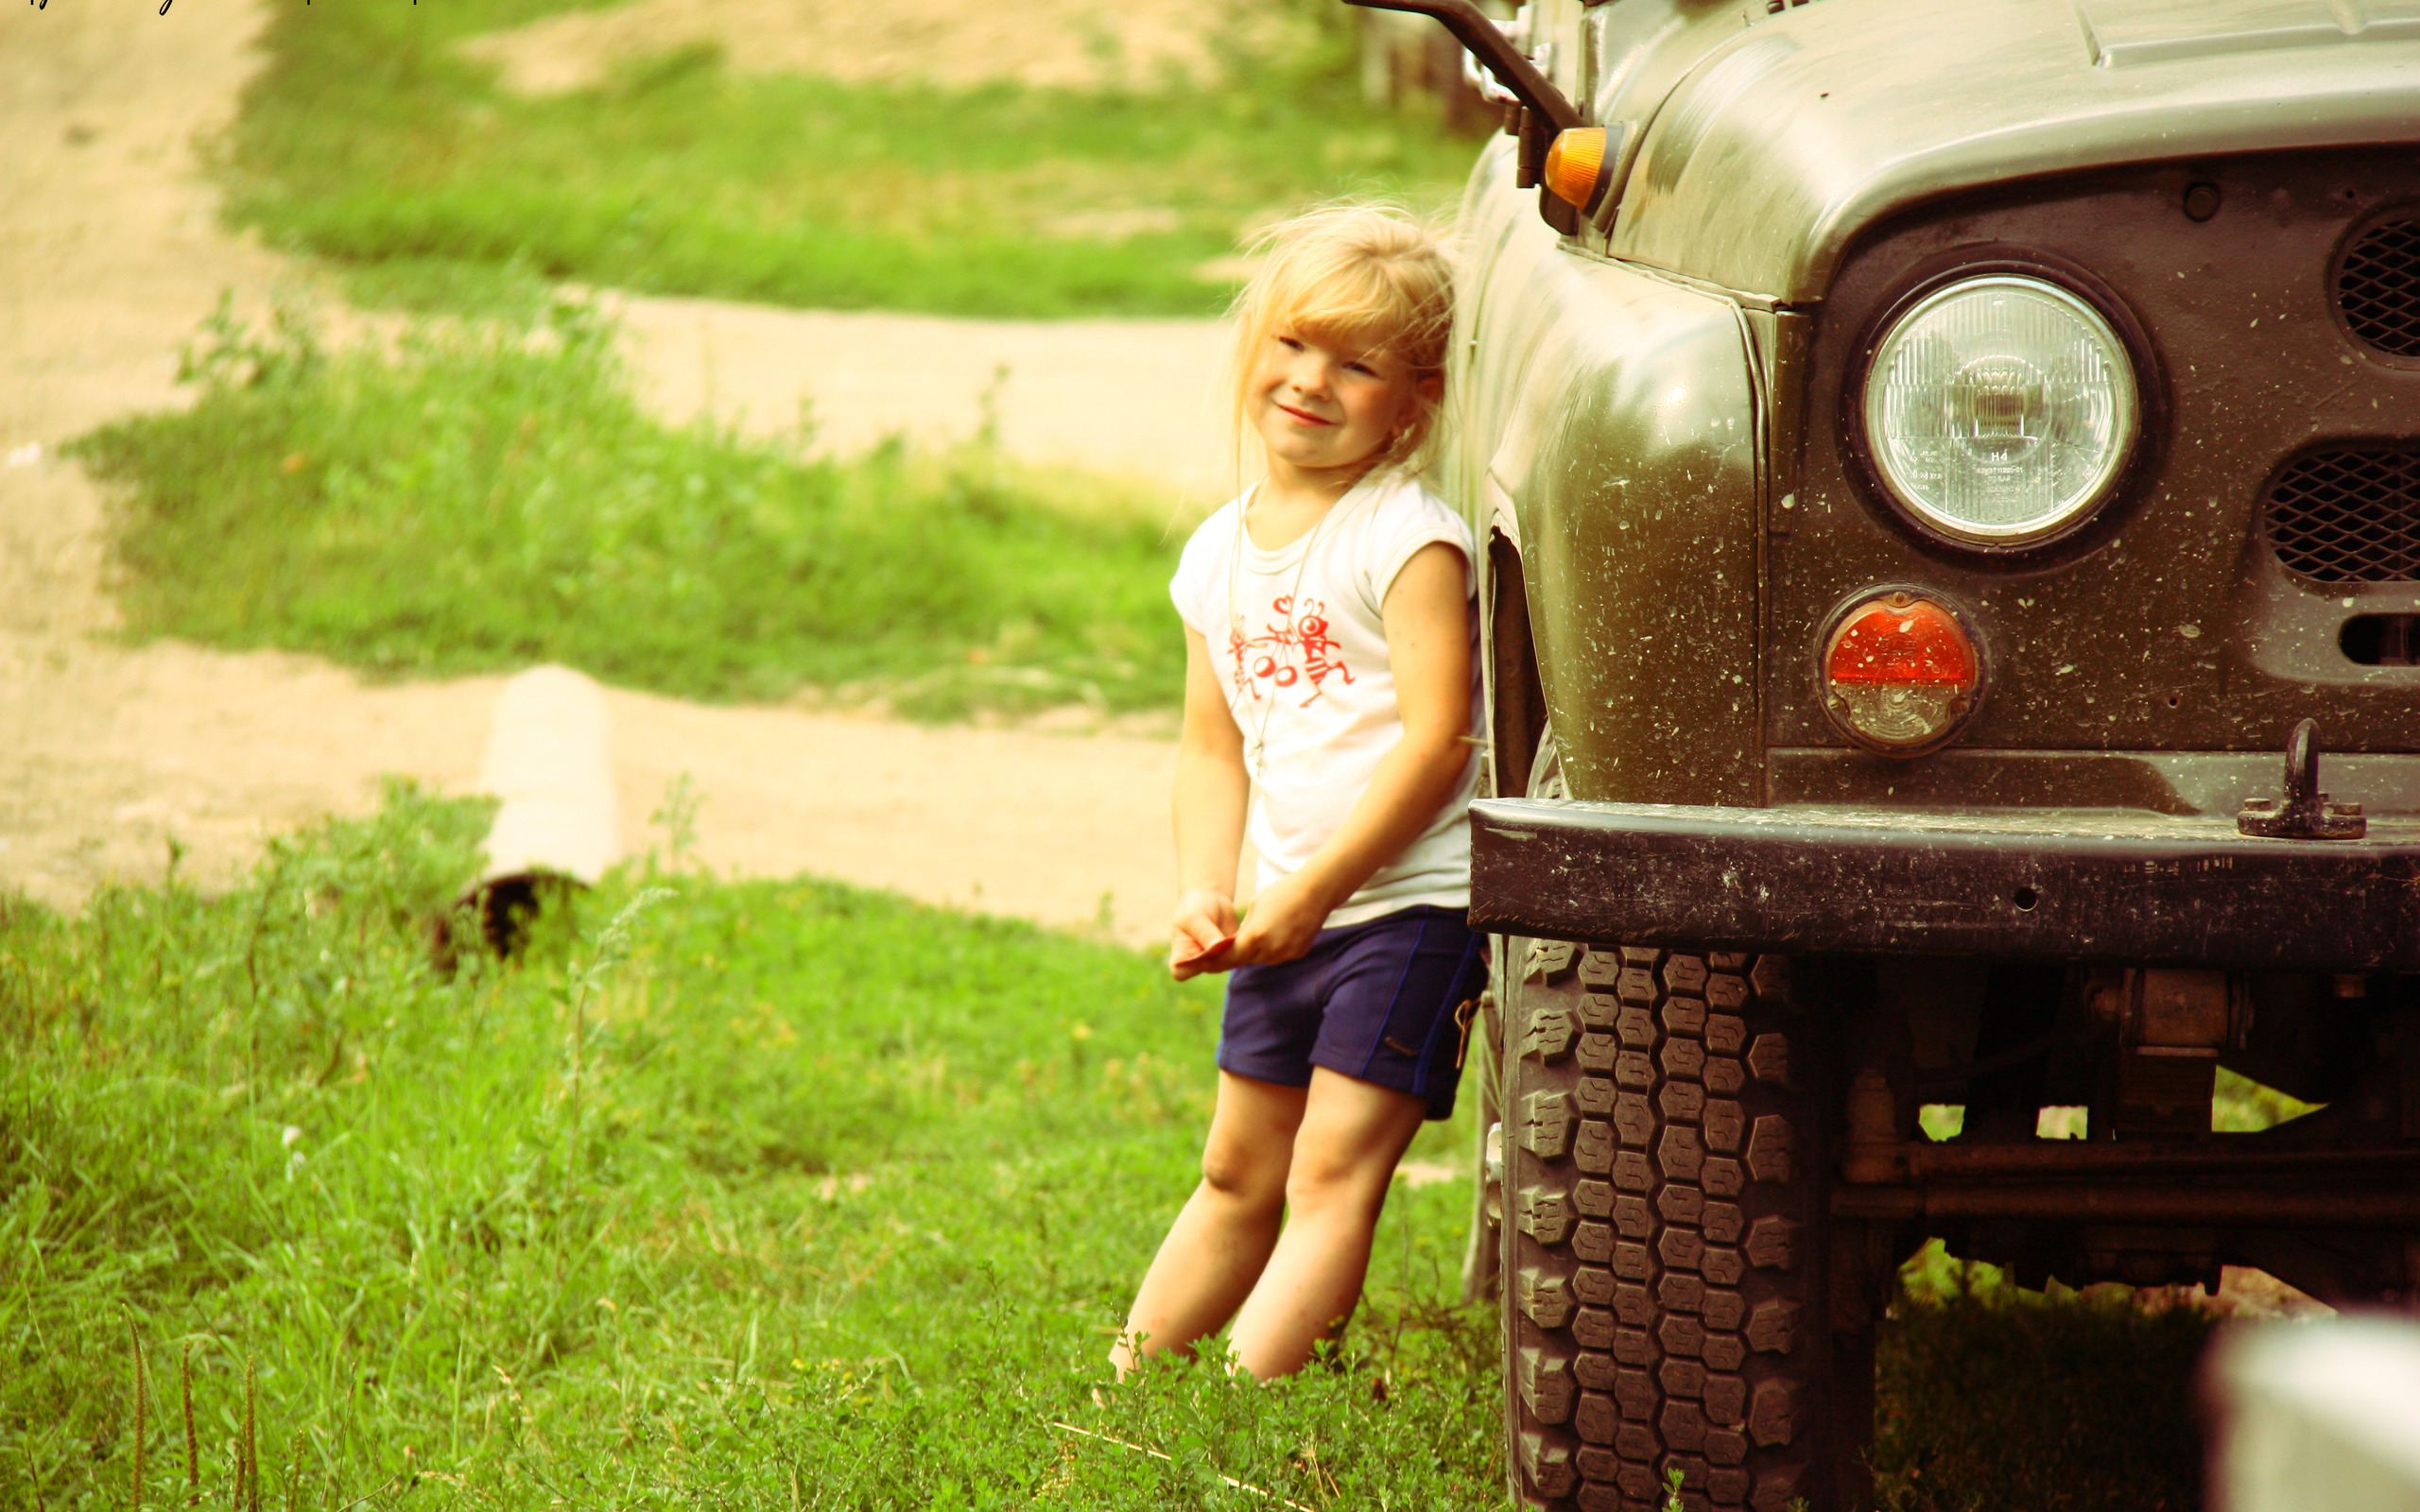 Adorable child enjoying the great outdoors in a captivating photograph.